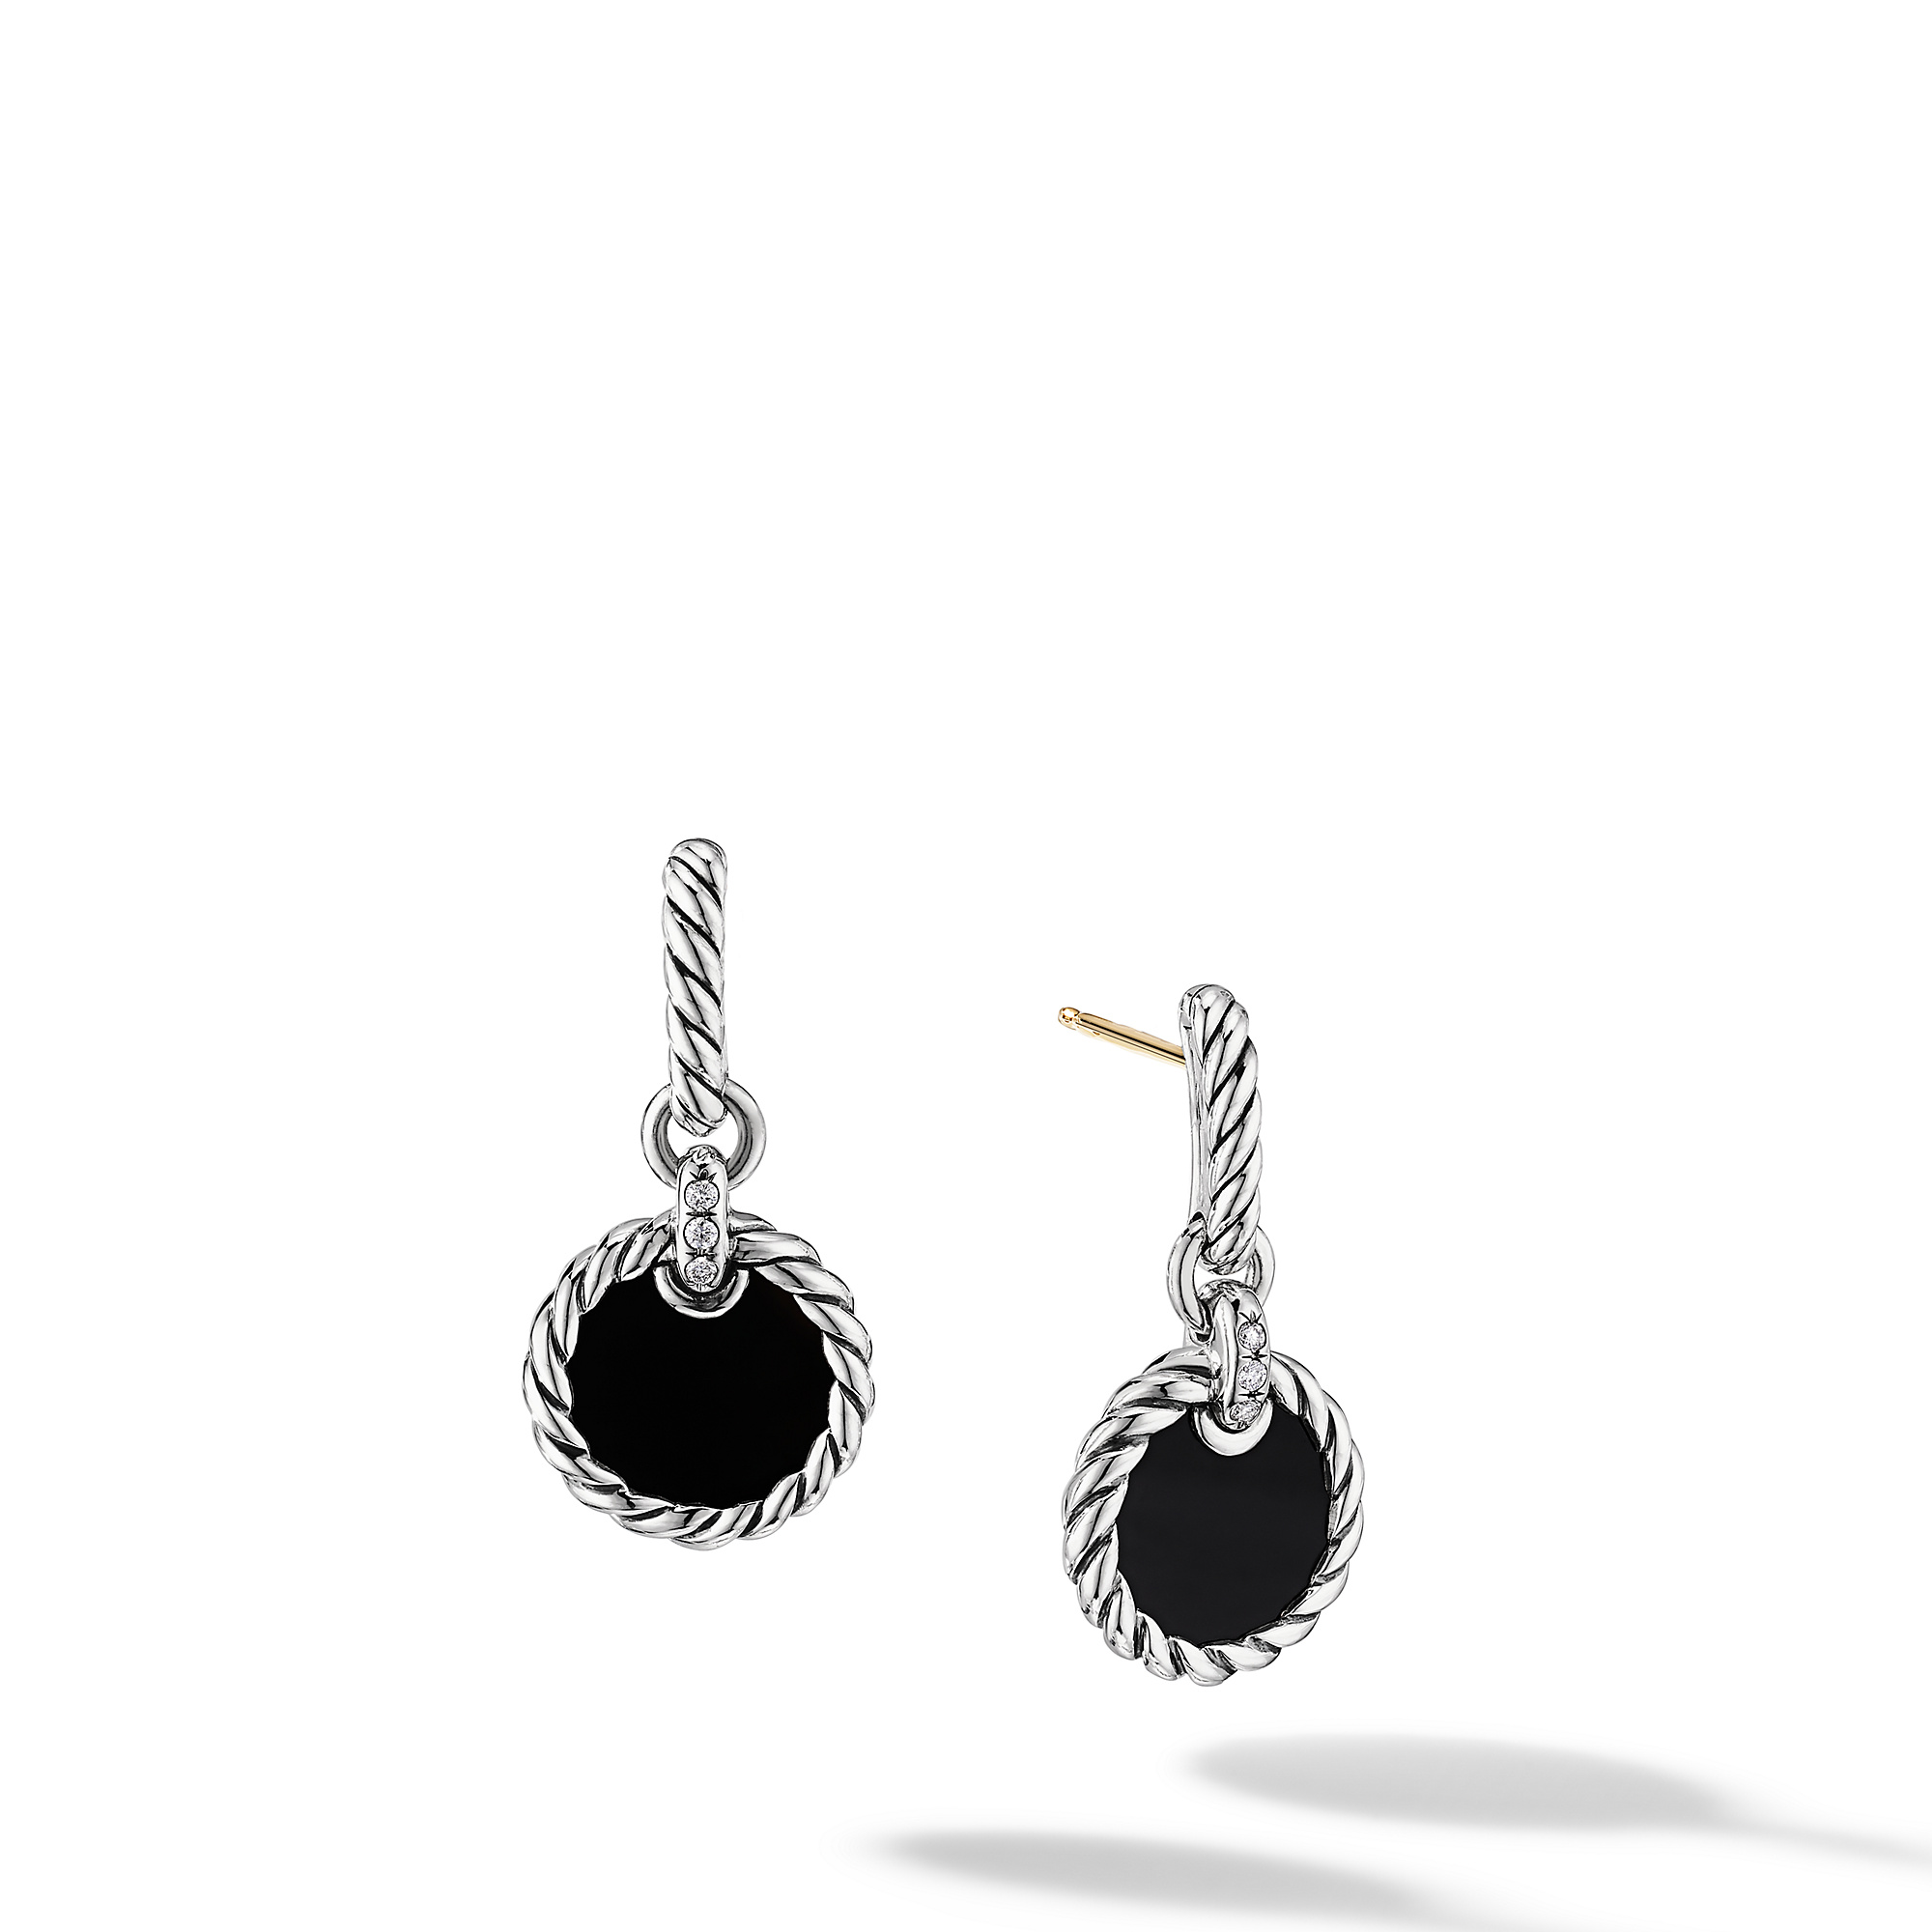 DY Elements® Drop Earrings in Sterling Silver with Black Onyx and Pave Diamonds